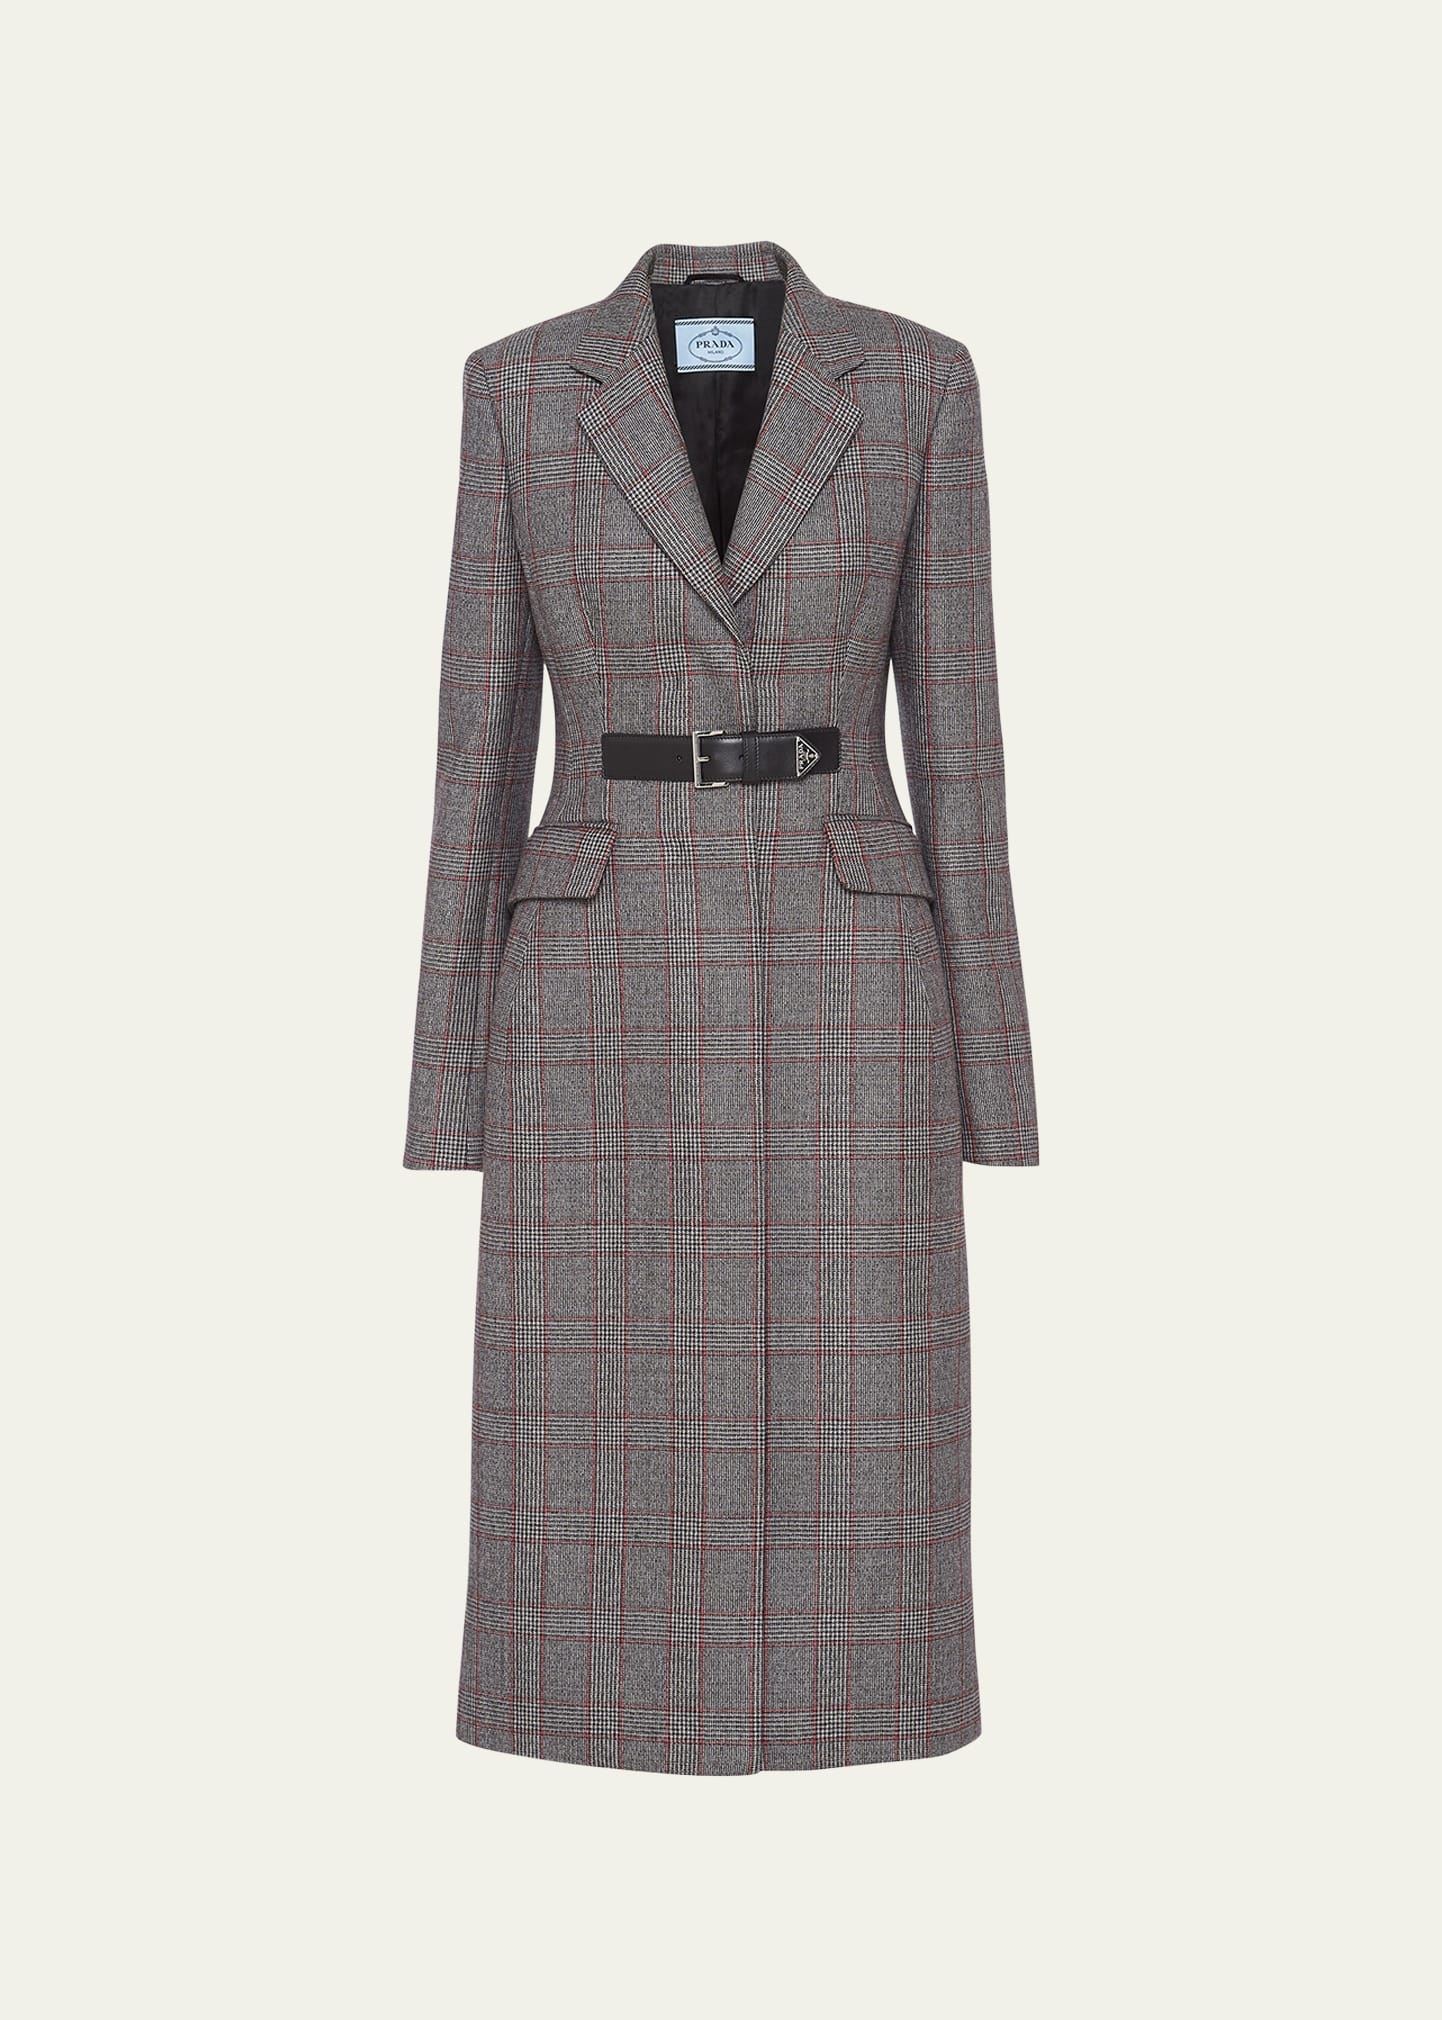 Galles Wool Coat with Leather Belt - 1